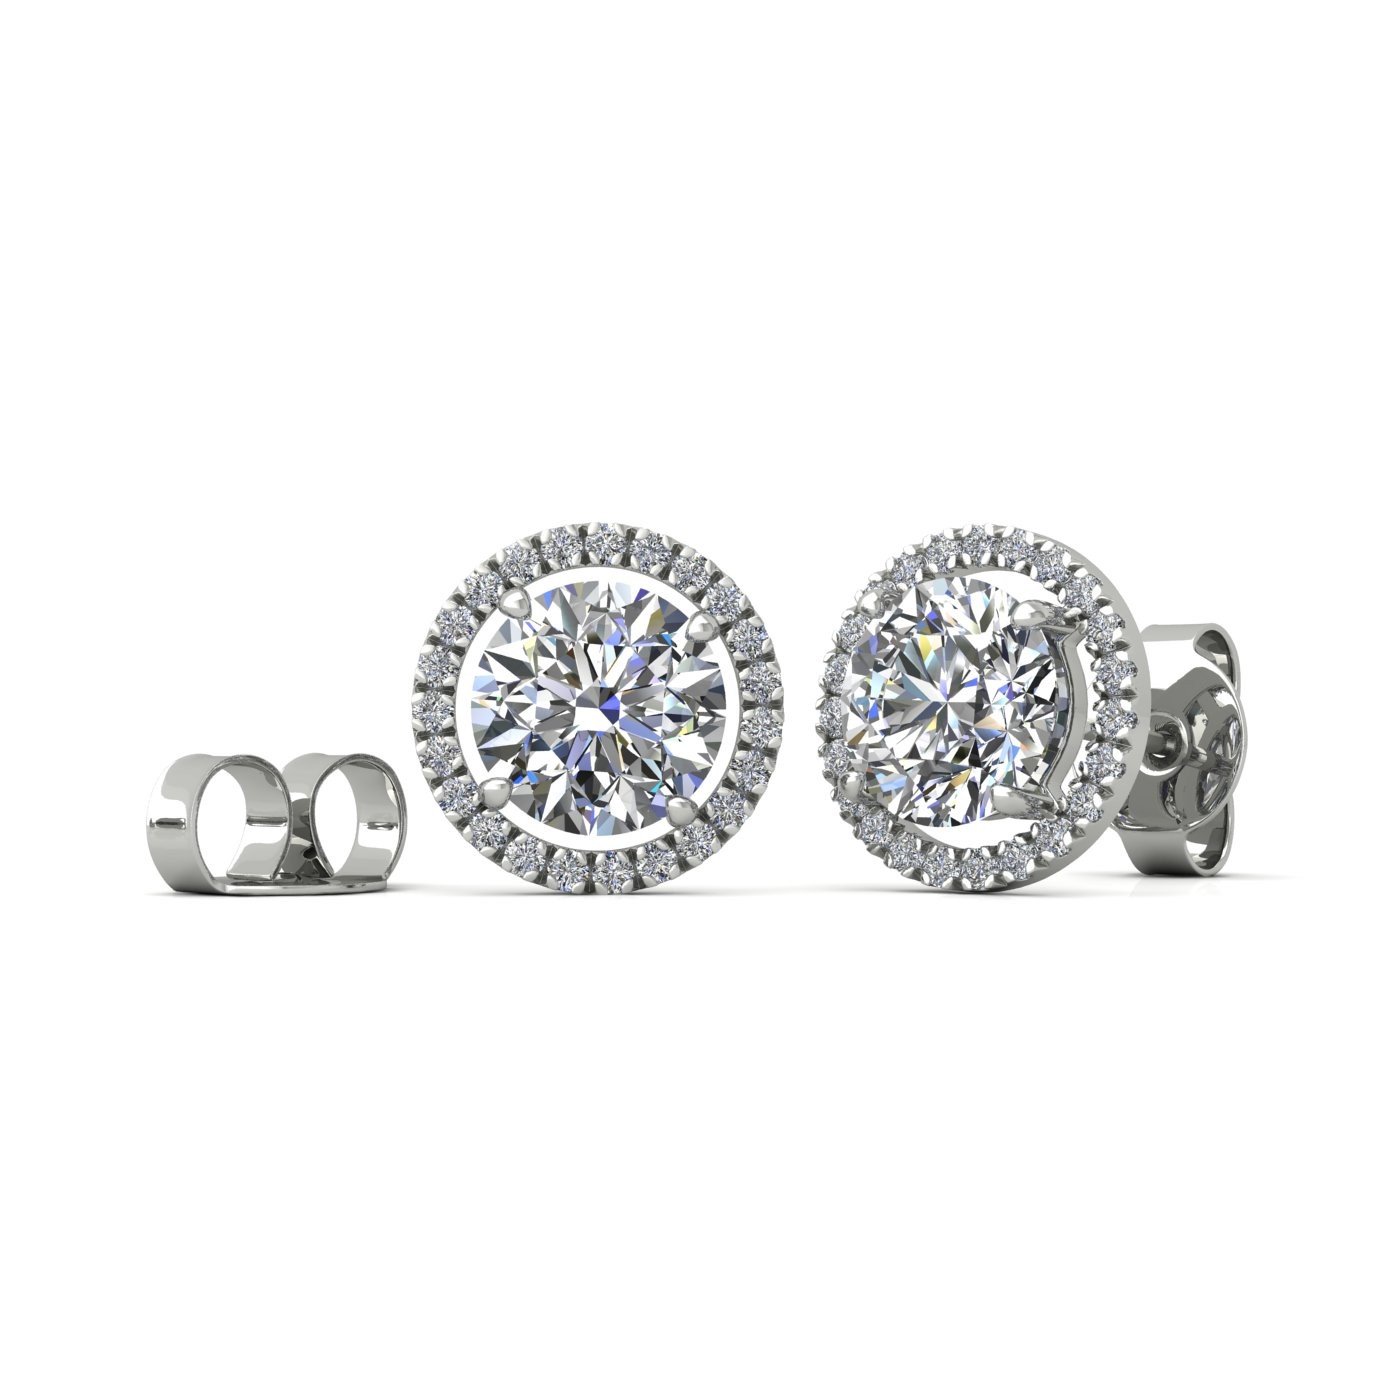 18k white gold  1,5 ct each (3 tcw) 4 prongs round brilliant cut halo diamond earring studs Photos & images